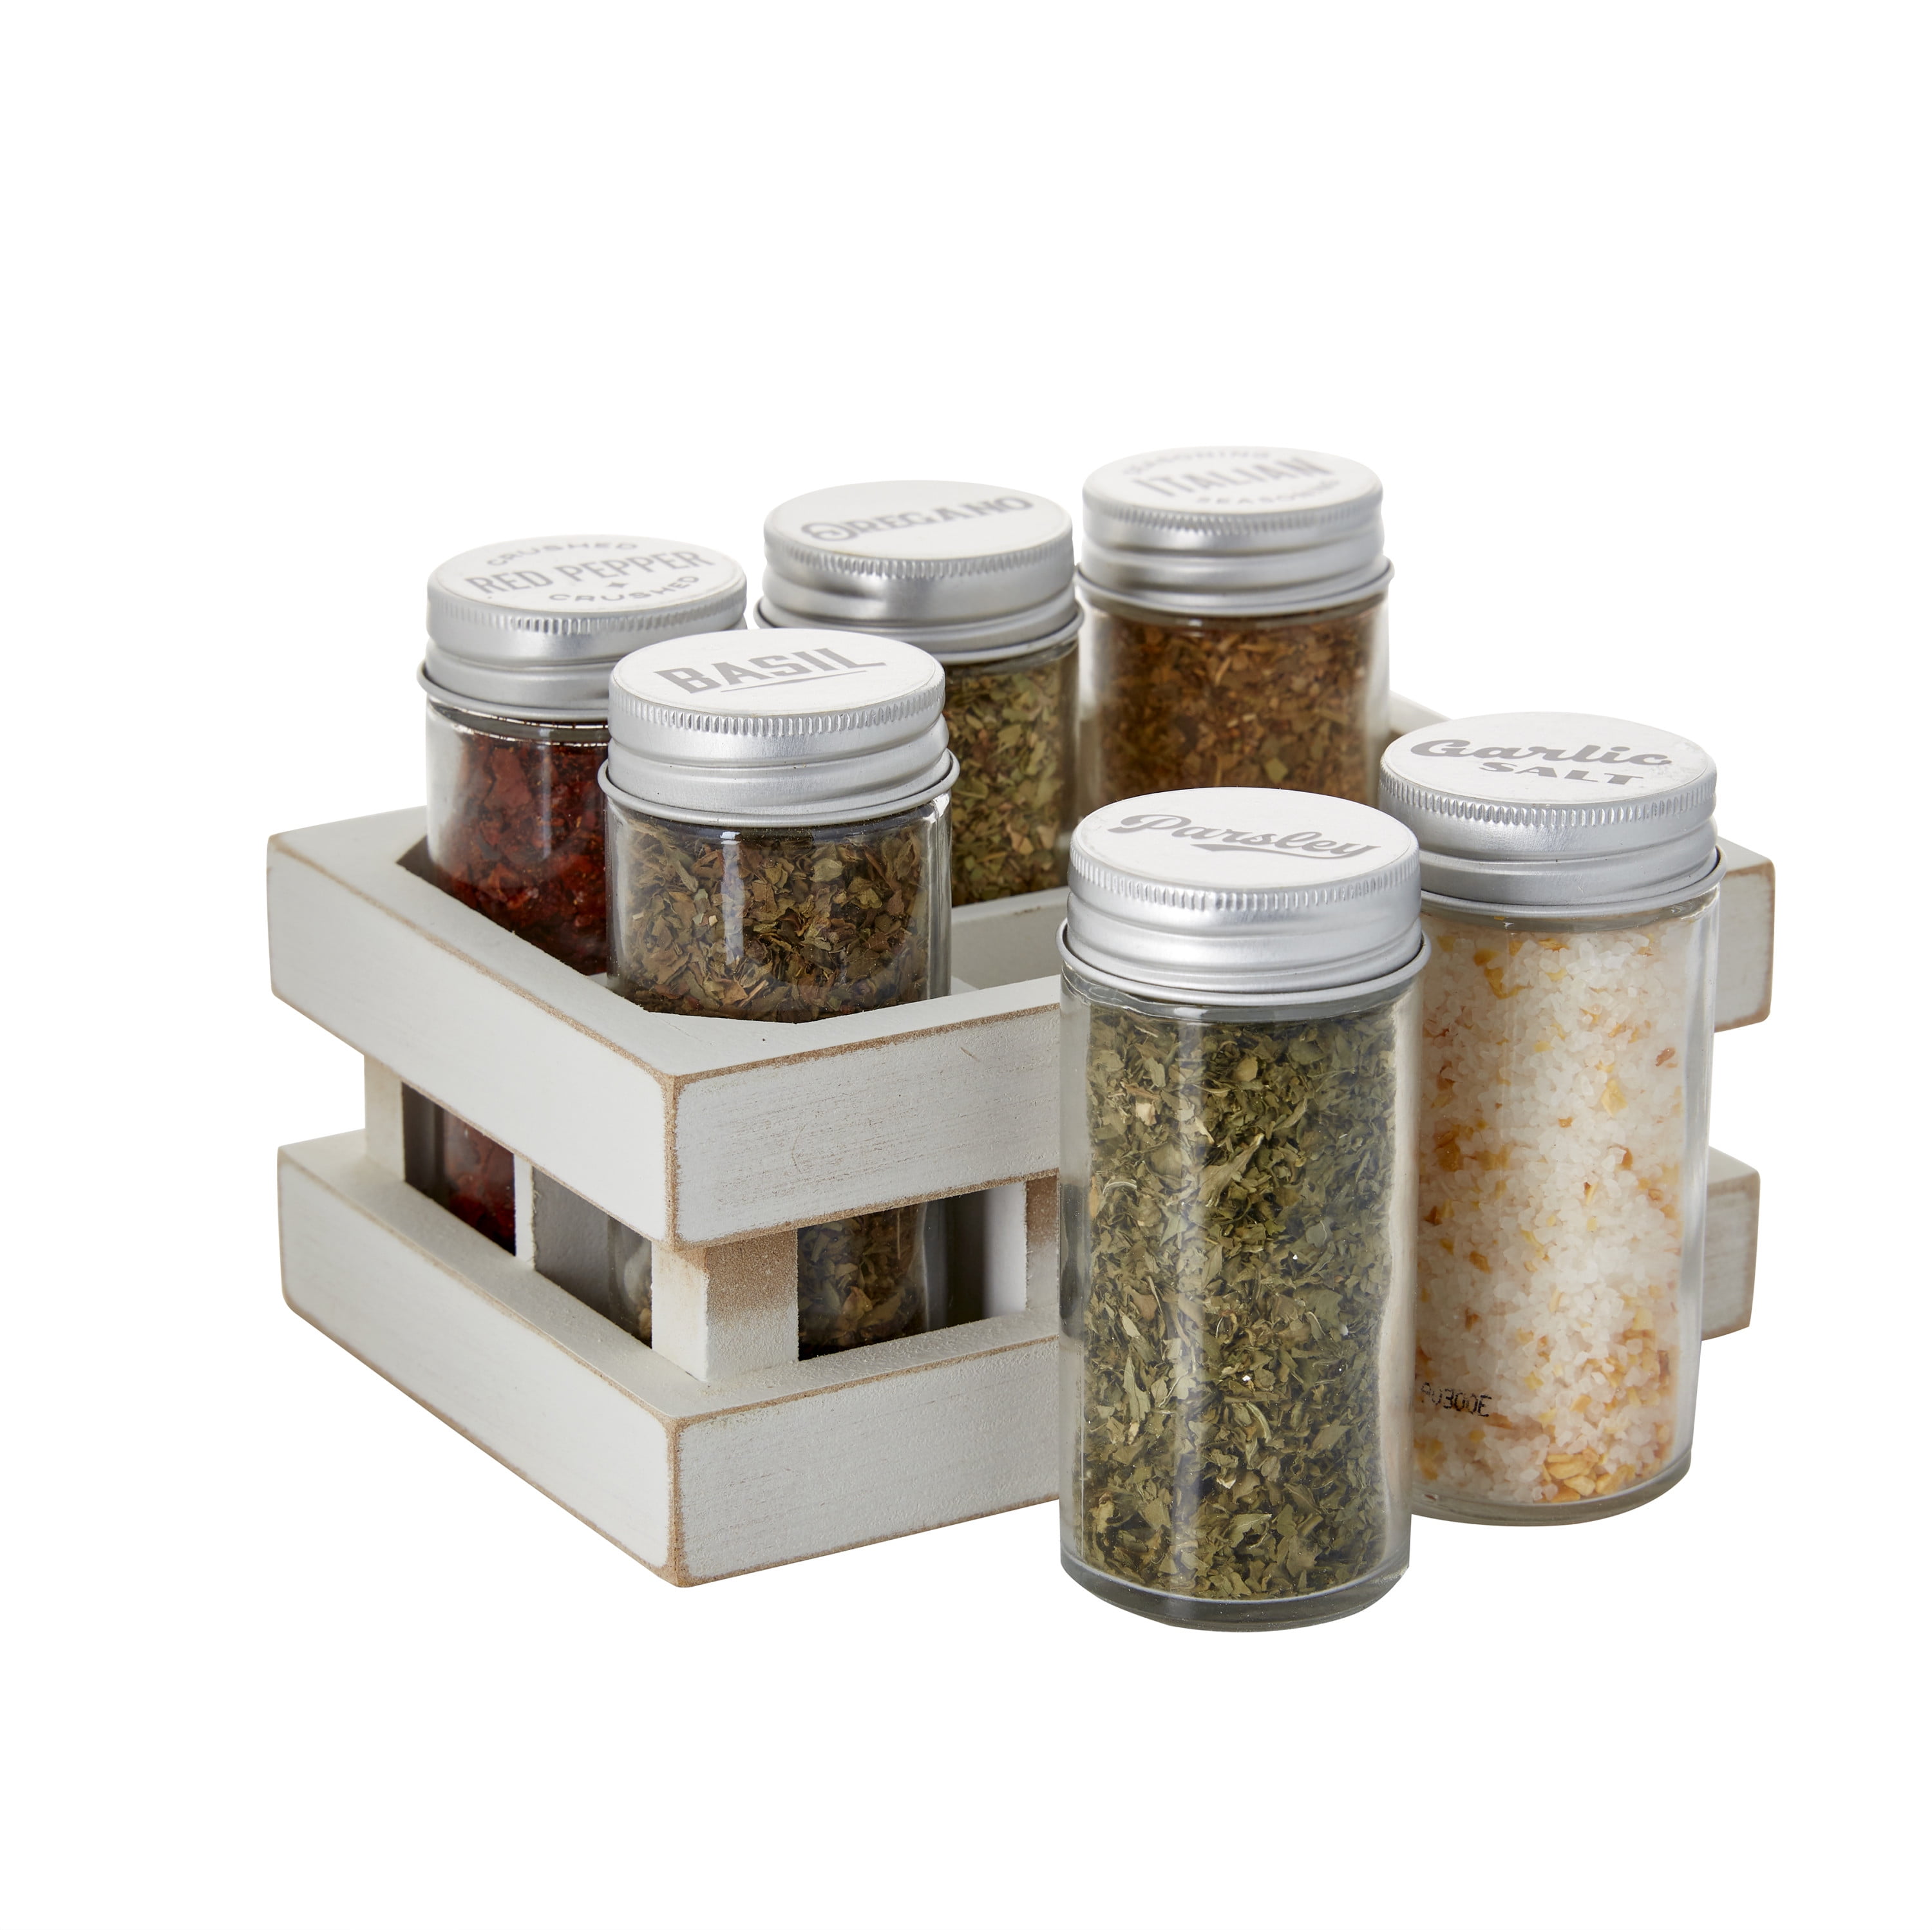 Kamenstein Goodspice 6-Jar Spice Crate Rack in Black, Spices and Jars  Included